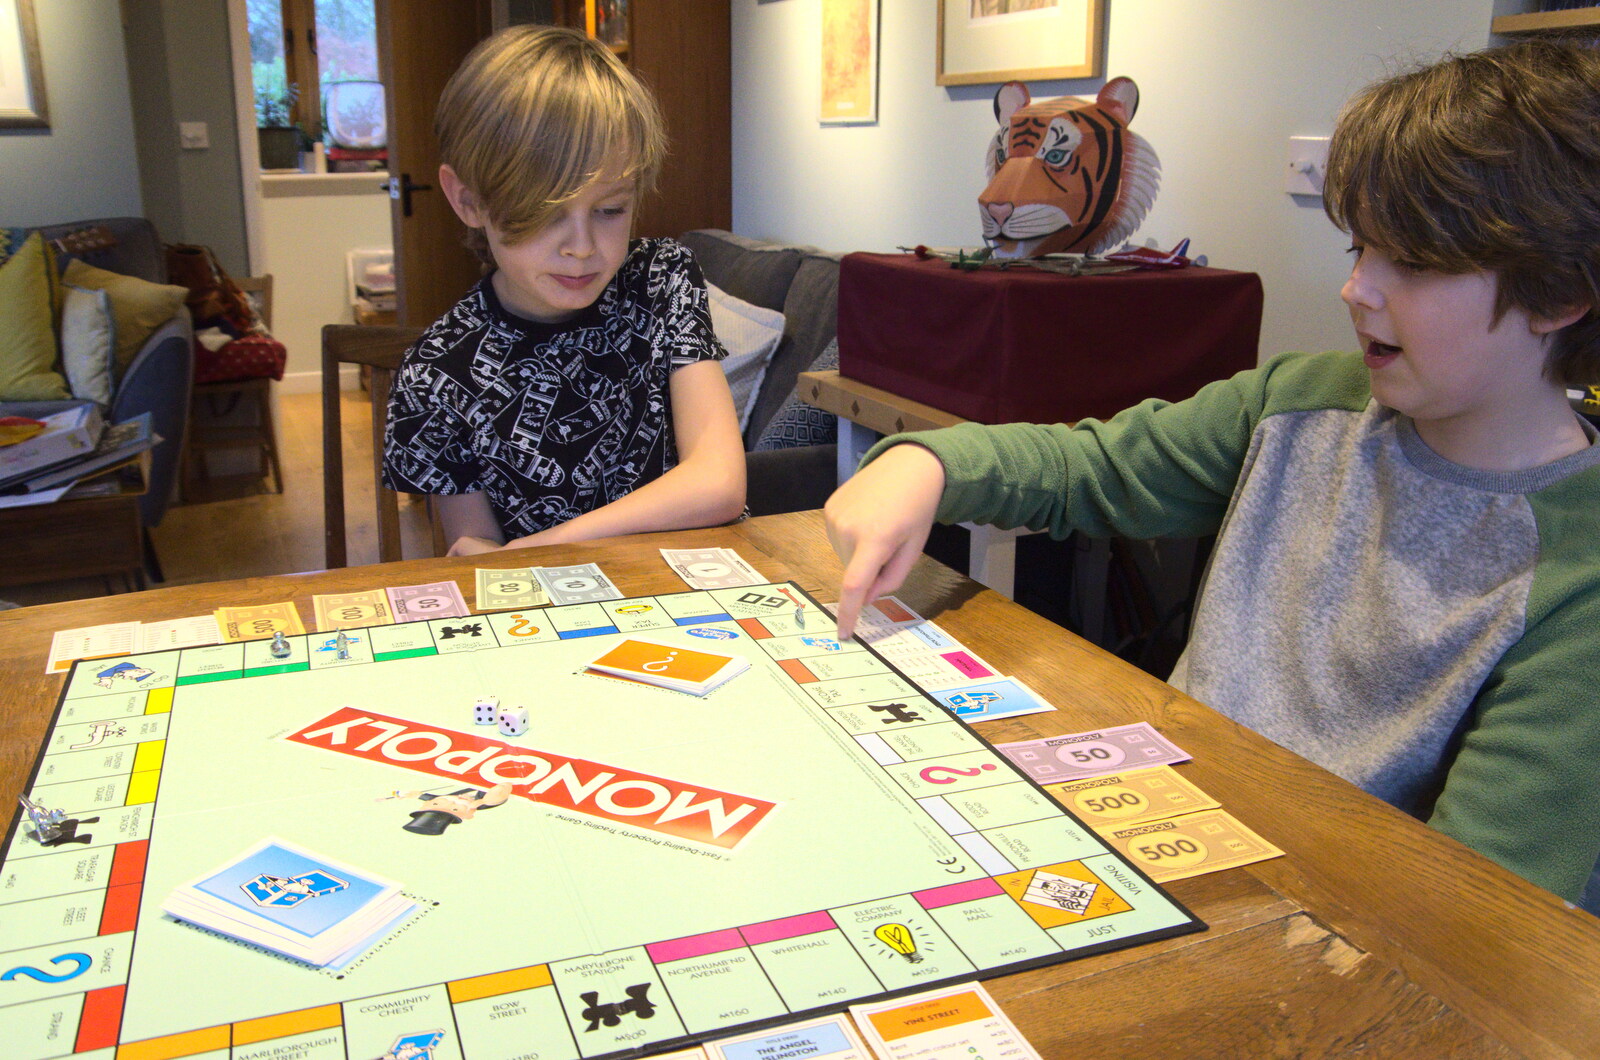 We have a game of Monopoly from Christmas Day, Brome, Suffolk - 25th December 2020